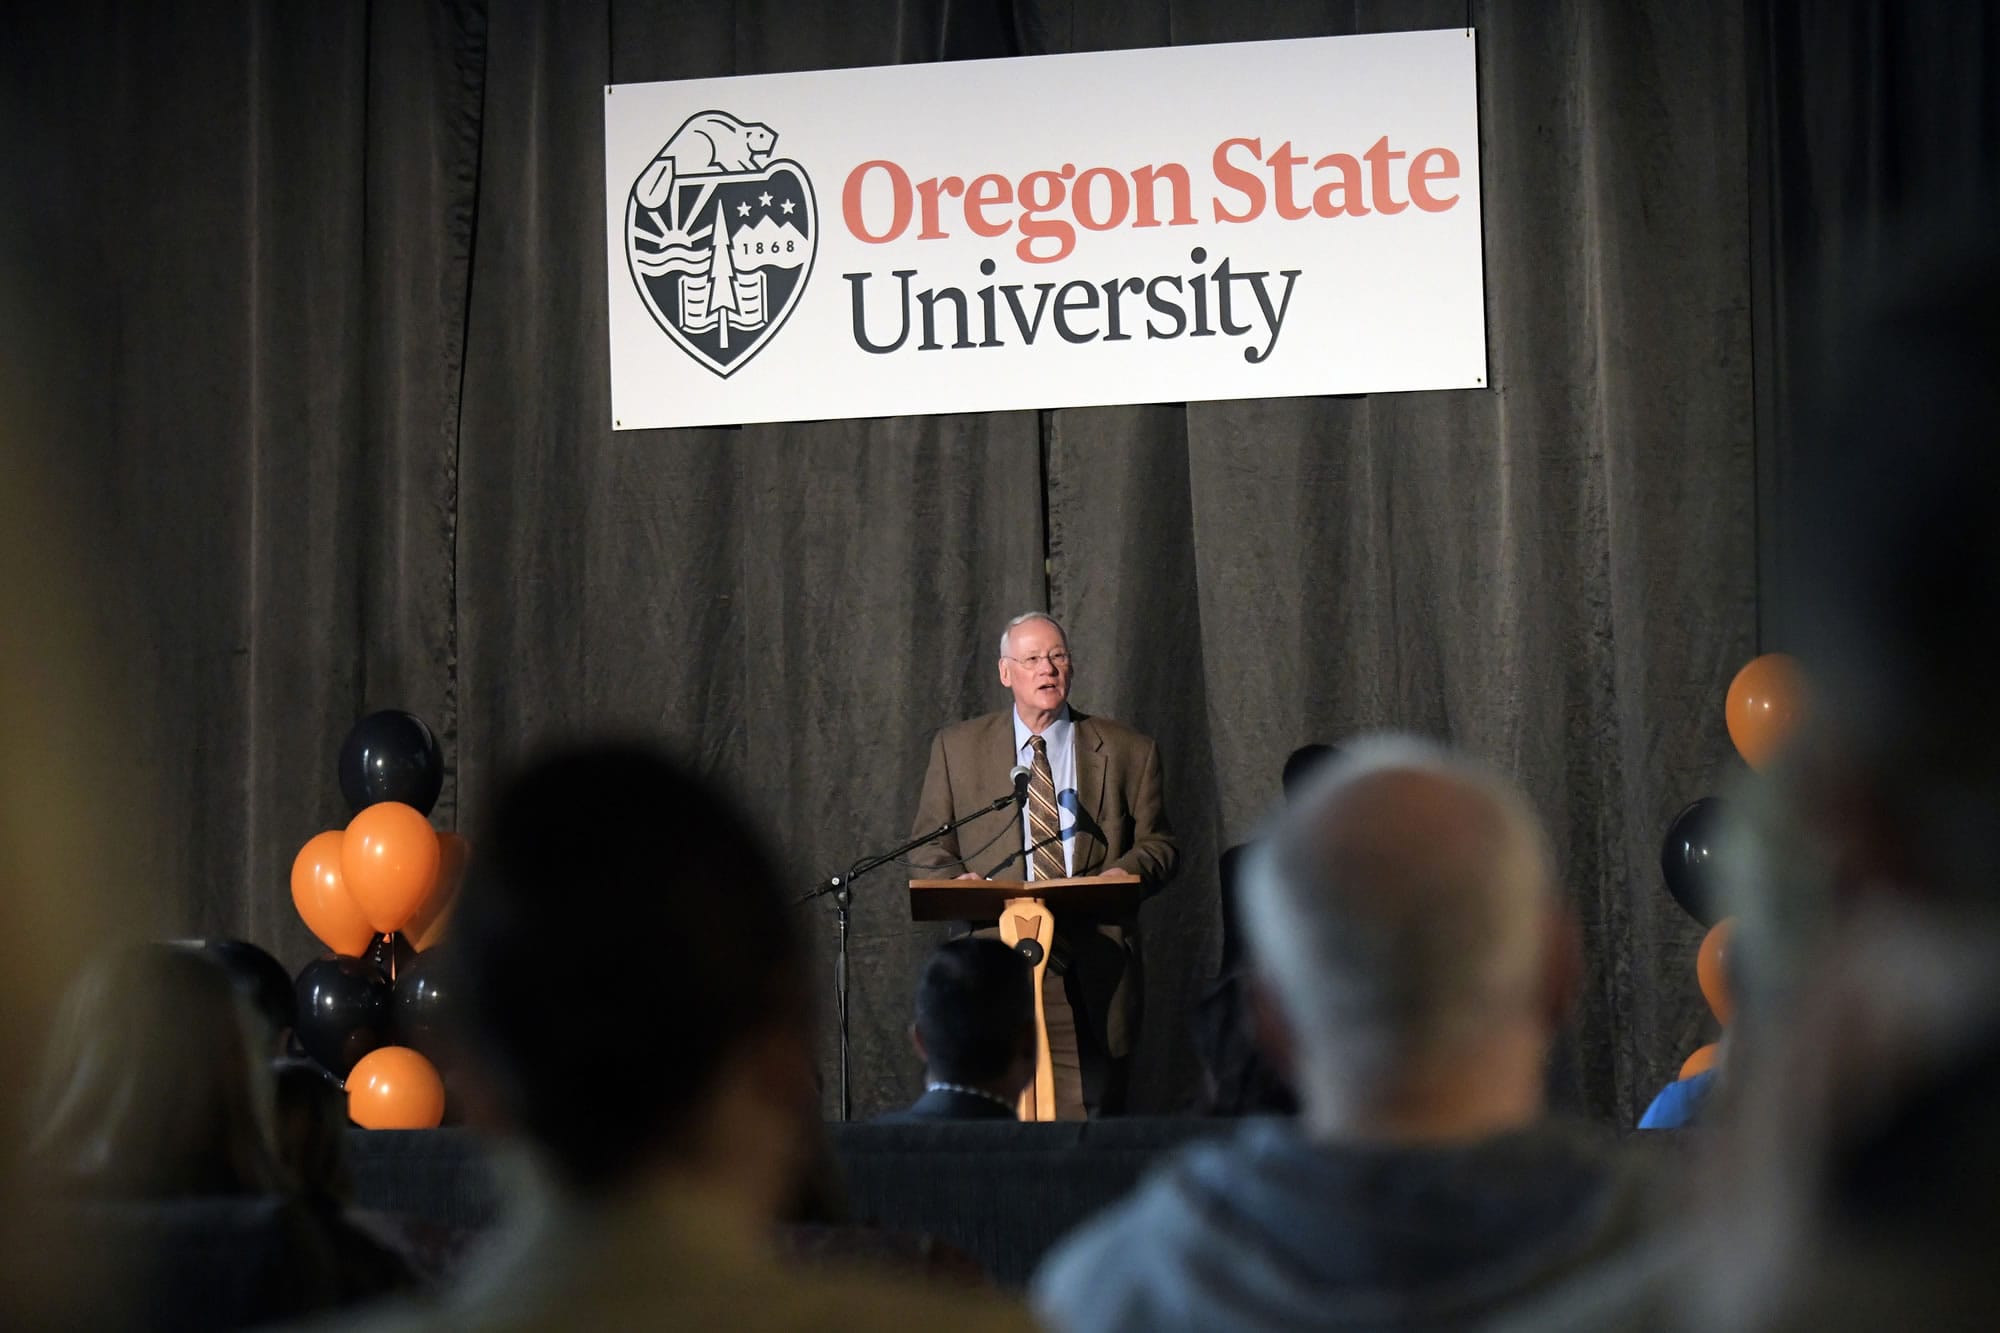 Oregon State University President Ed Ray unveils a new logo Monday in the Memorial Union in Corvallis, Ore.  The university unveiled a new logo in an effort to make the school stand out in Oregon and around the world.